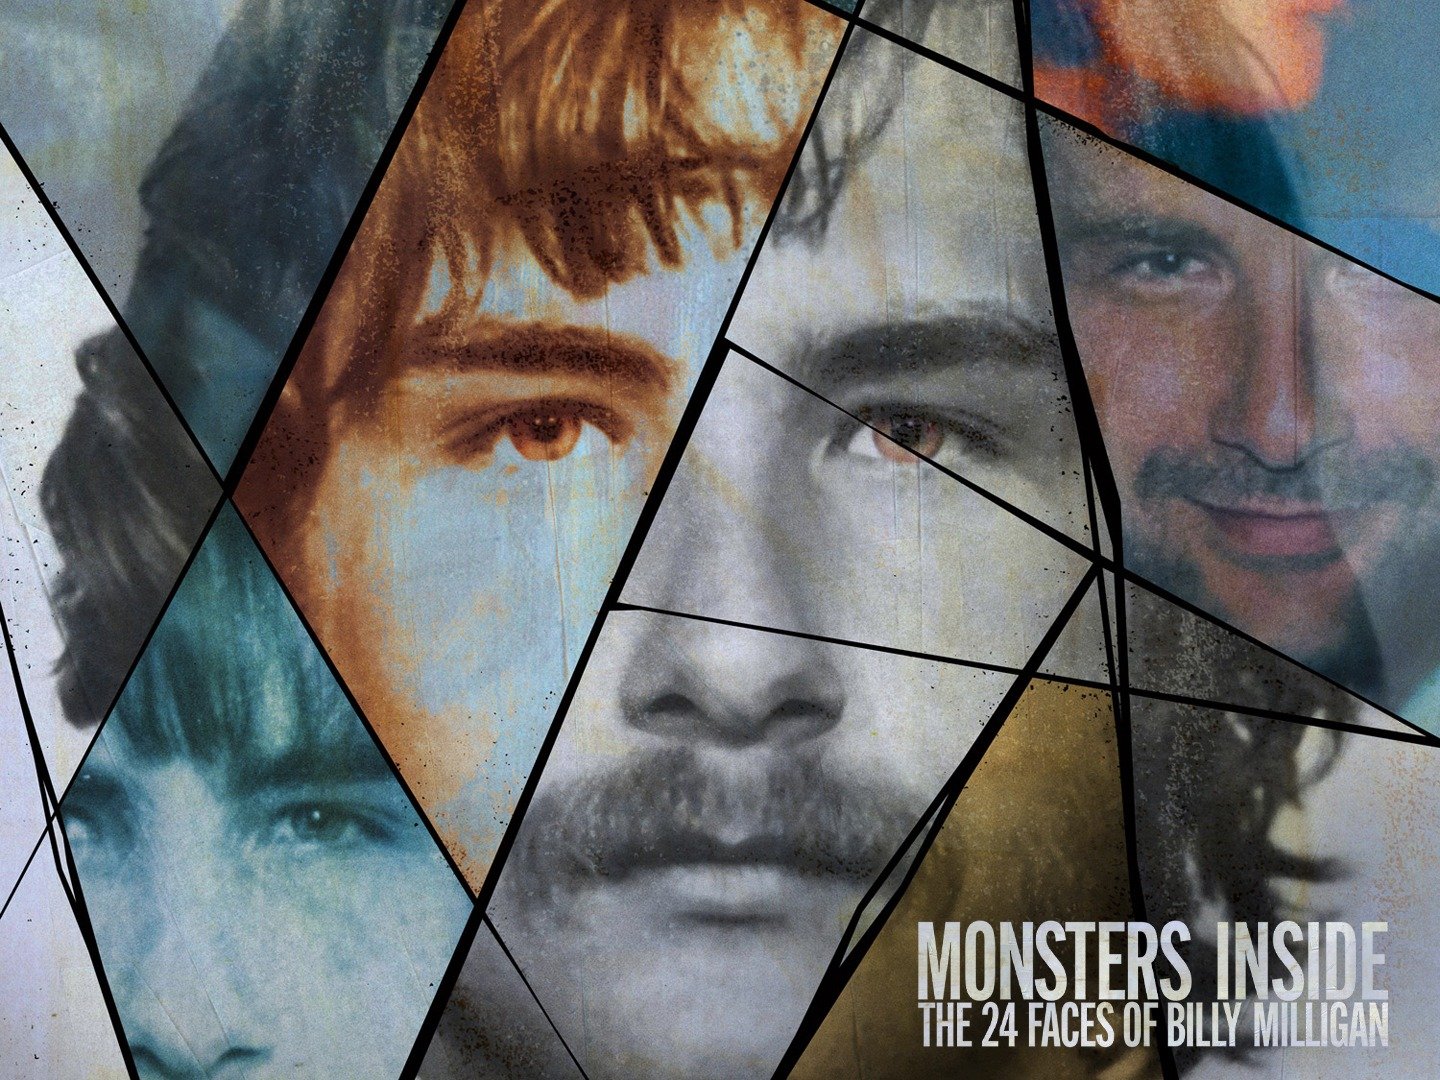 Monsters Inside: The 24 Faces of Billy Milligan - Rotten Tomatoes